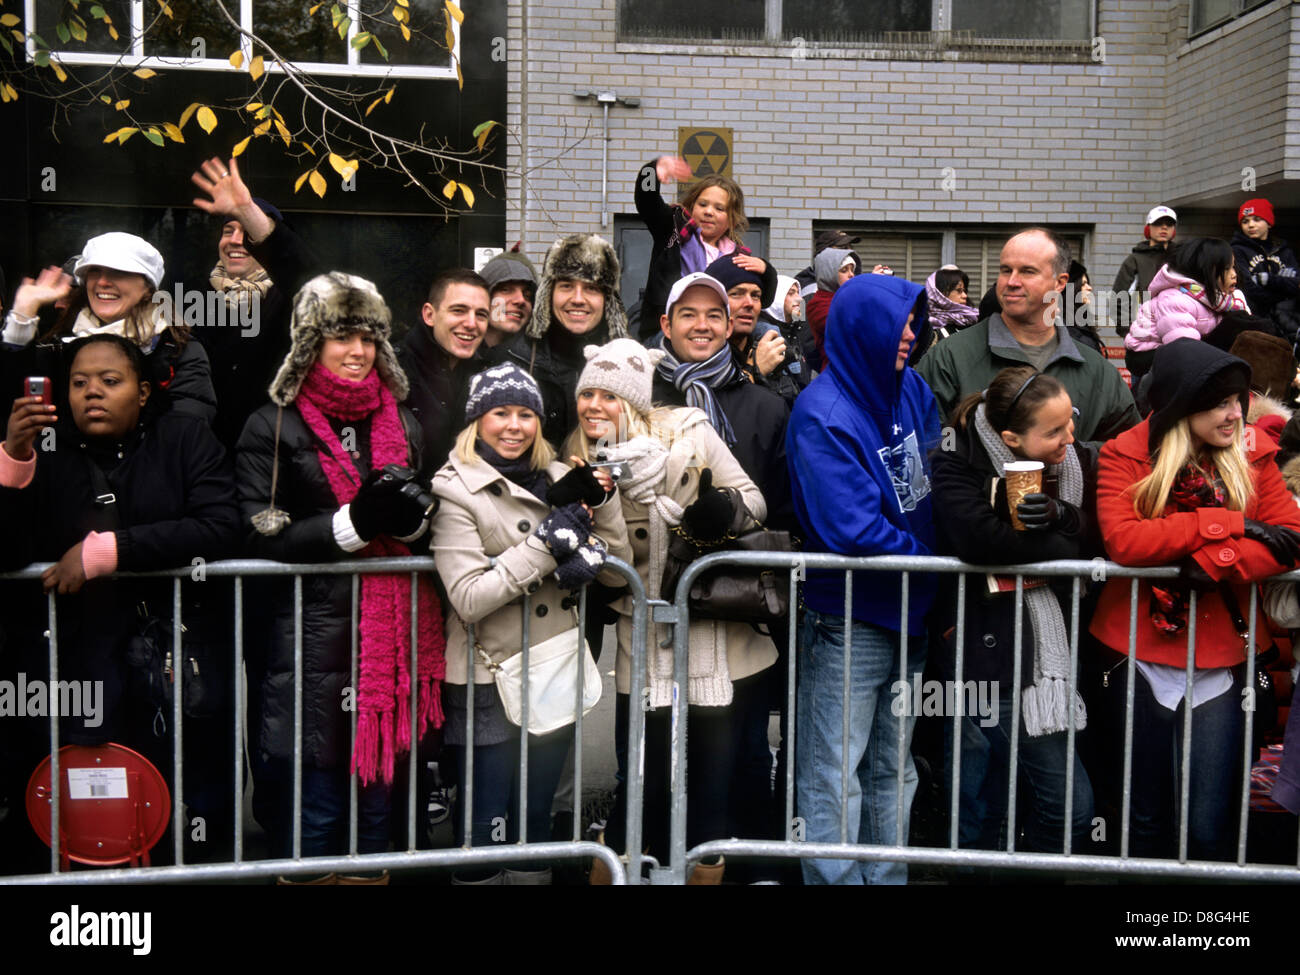 New York City crowded street. Group of people watching Macy's Thanksgiving Day Parade behind barrier in Midtown Manhattan. Close-up Stock Photo